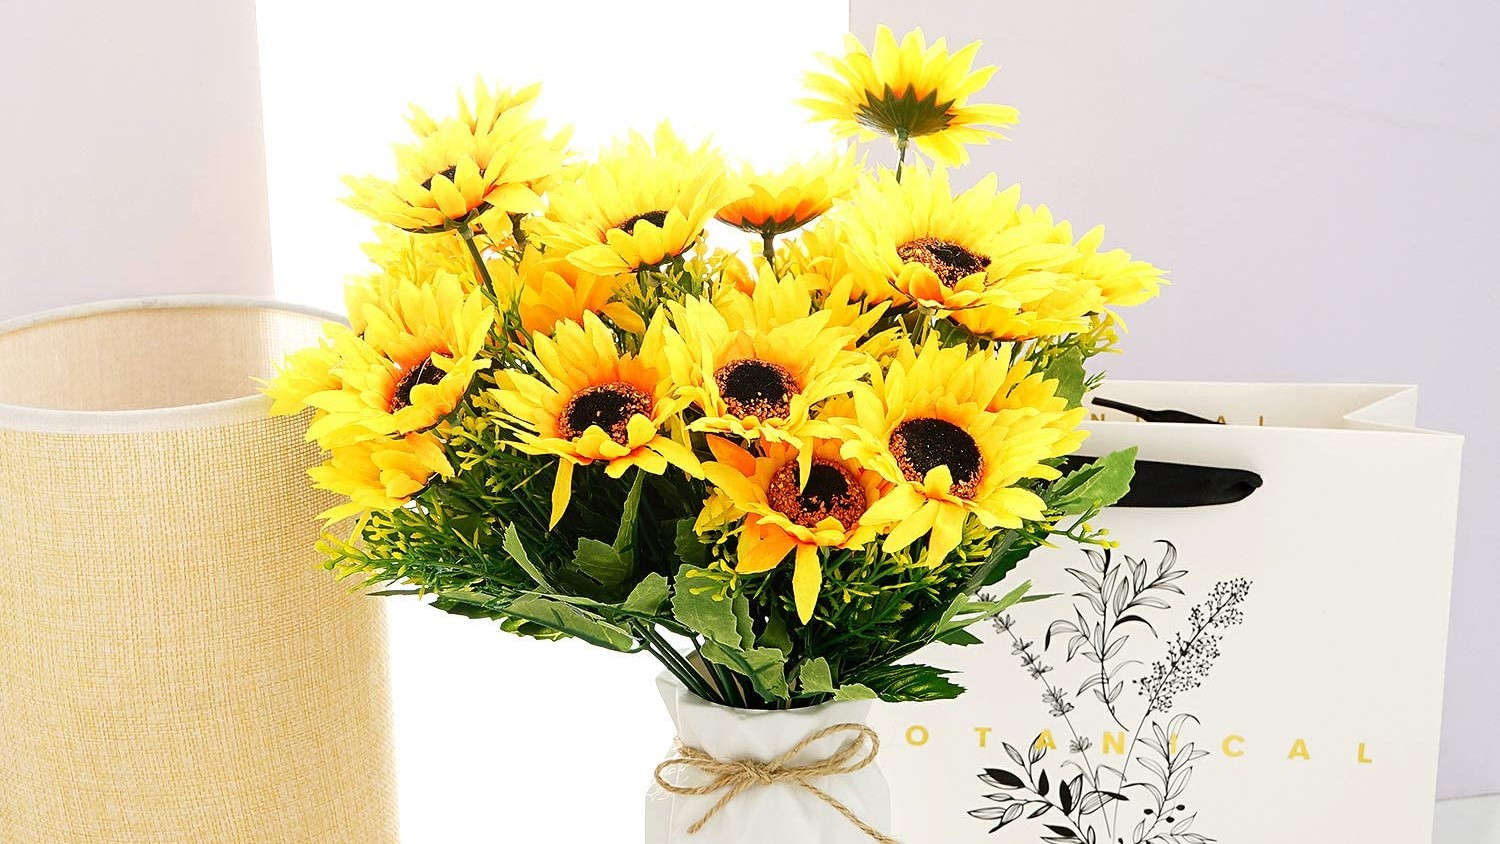 Where Can I Buy Fake Sunflowers